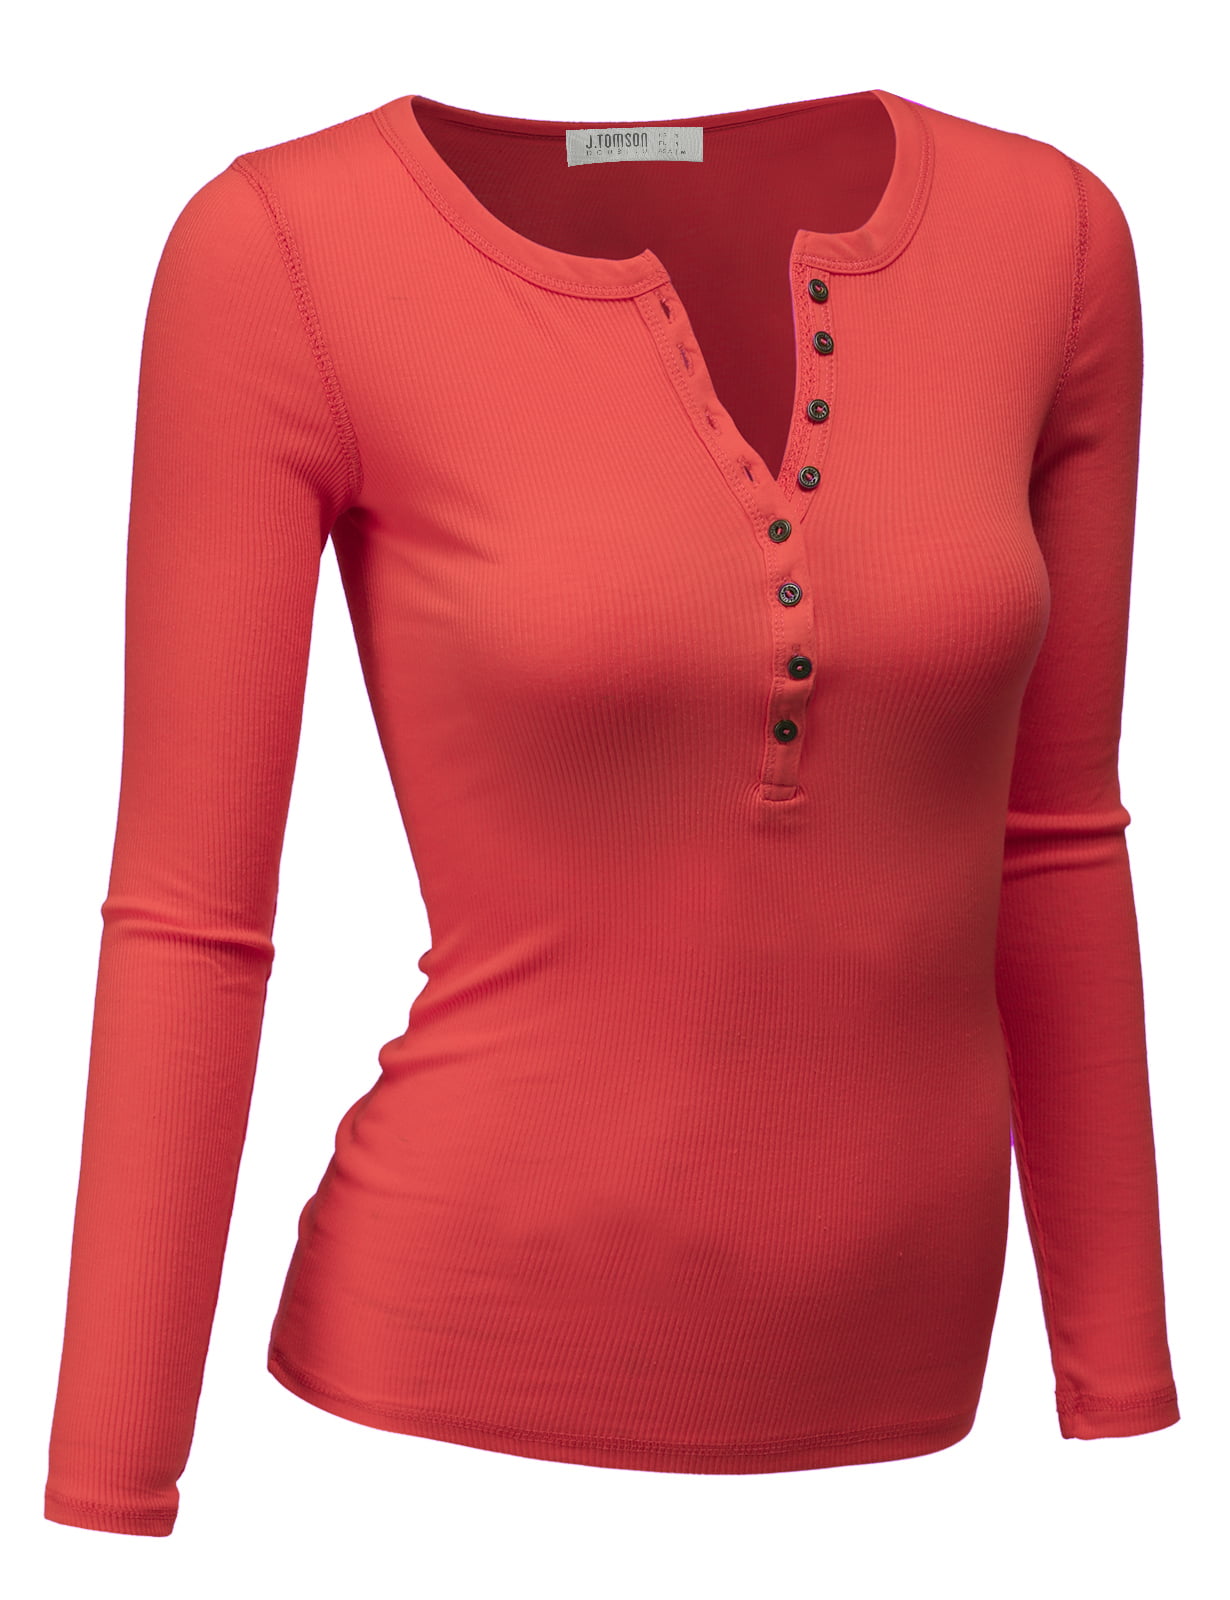 Doublju Women's Thermal Henley Long Sleeve Top with Plus Size 